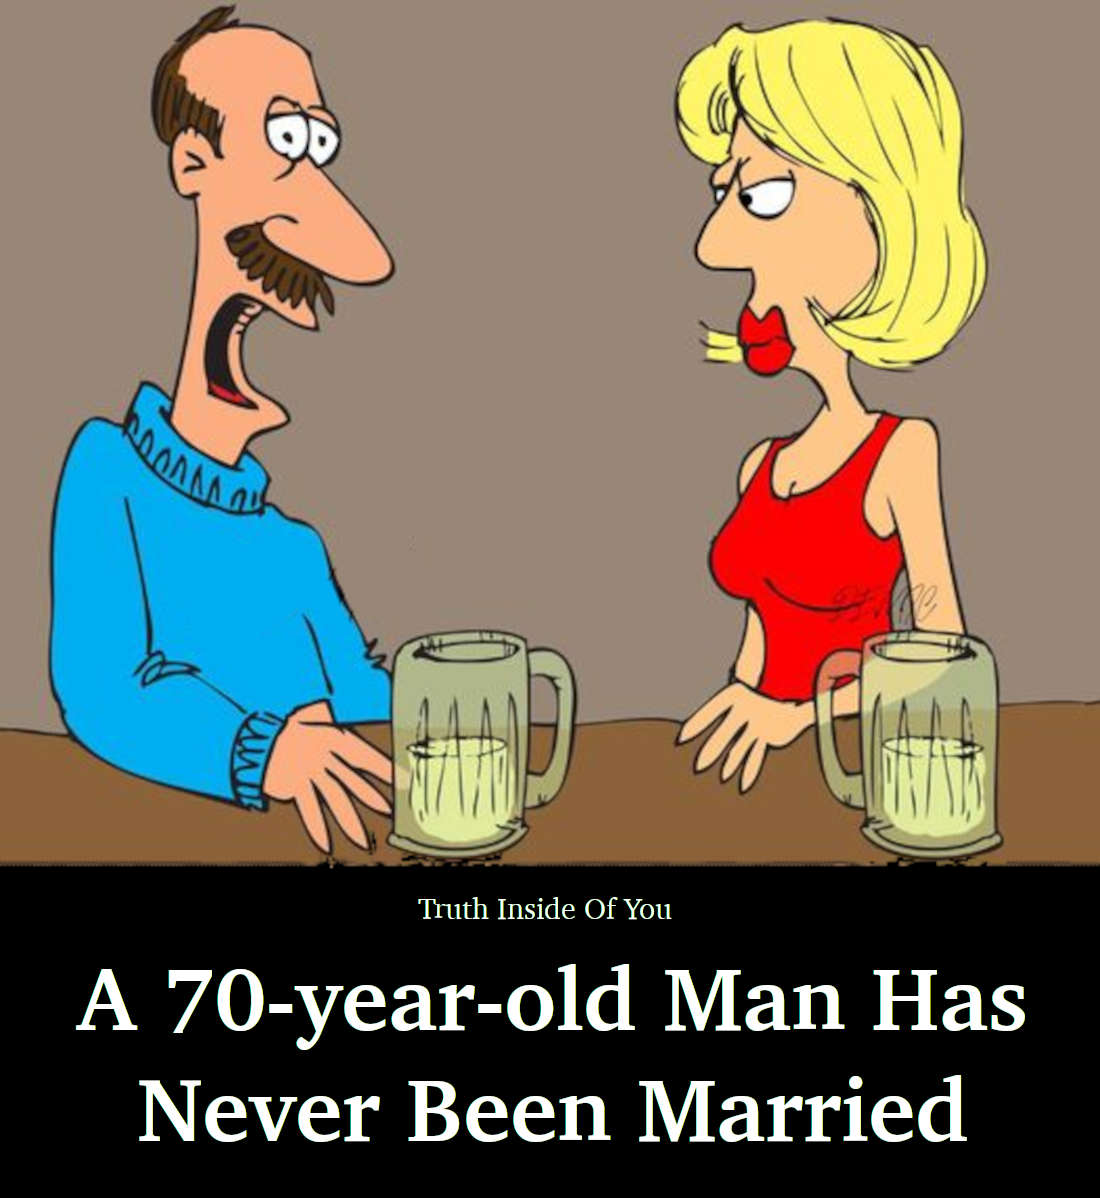 A 70-year-old Man Has Never Been Married